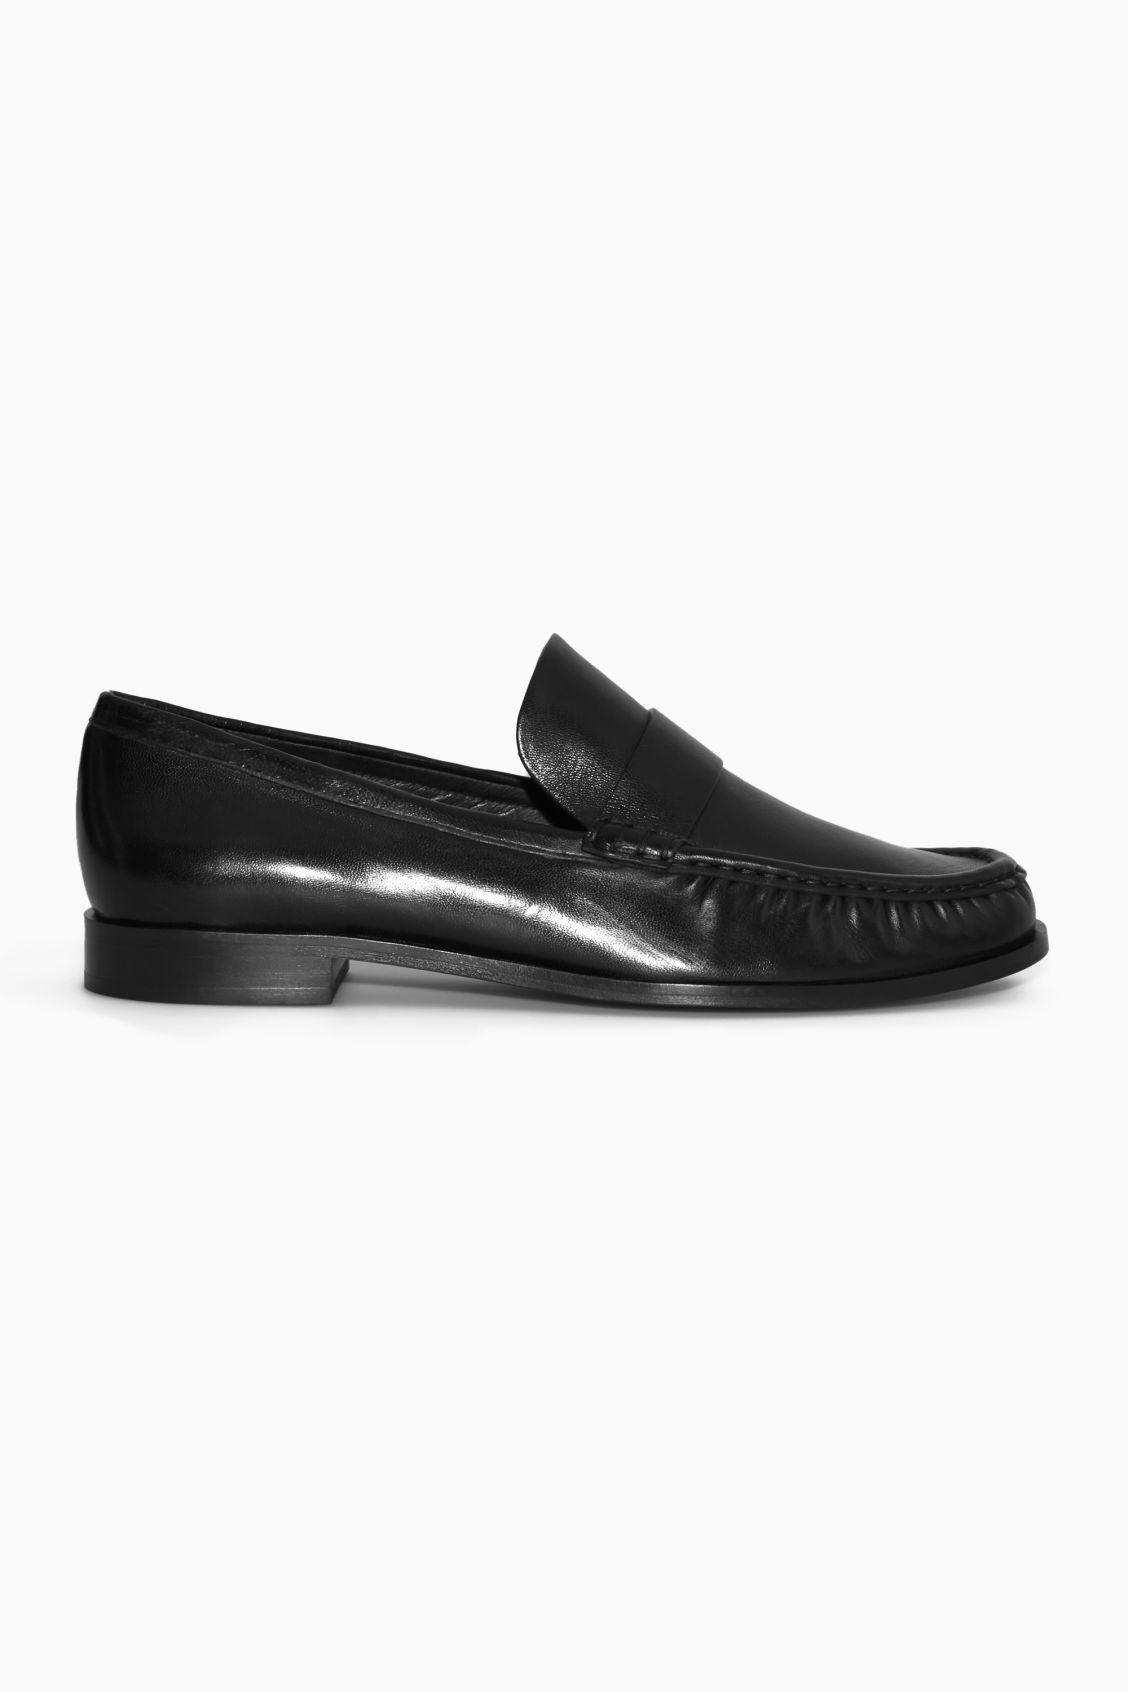 COS Leather Loafers in Black | Lyst